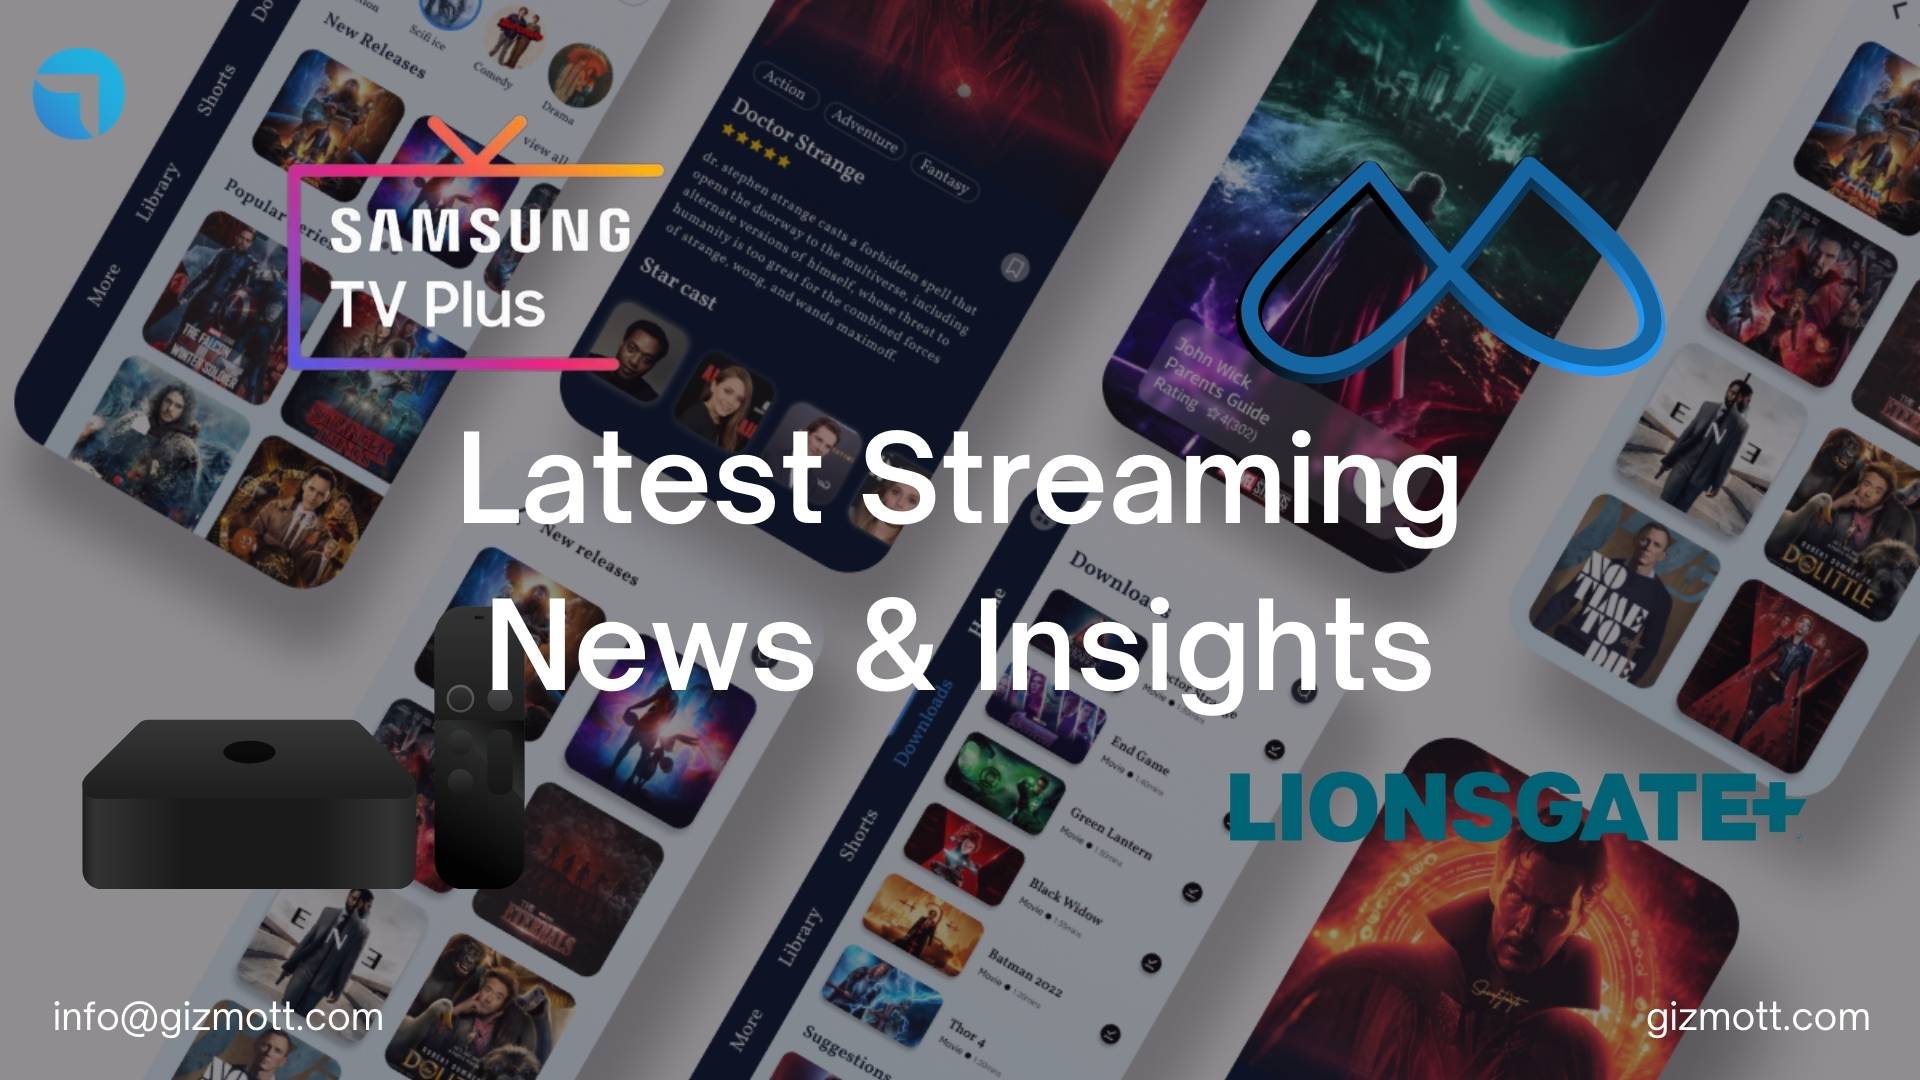 Latest Streaming News & Insights